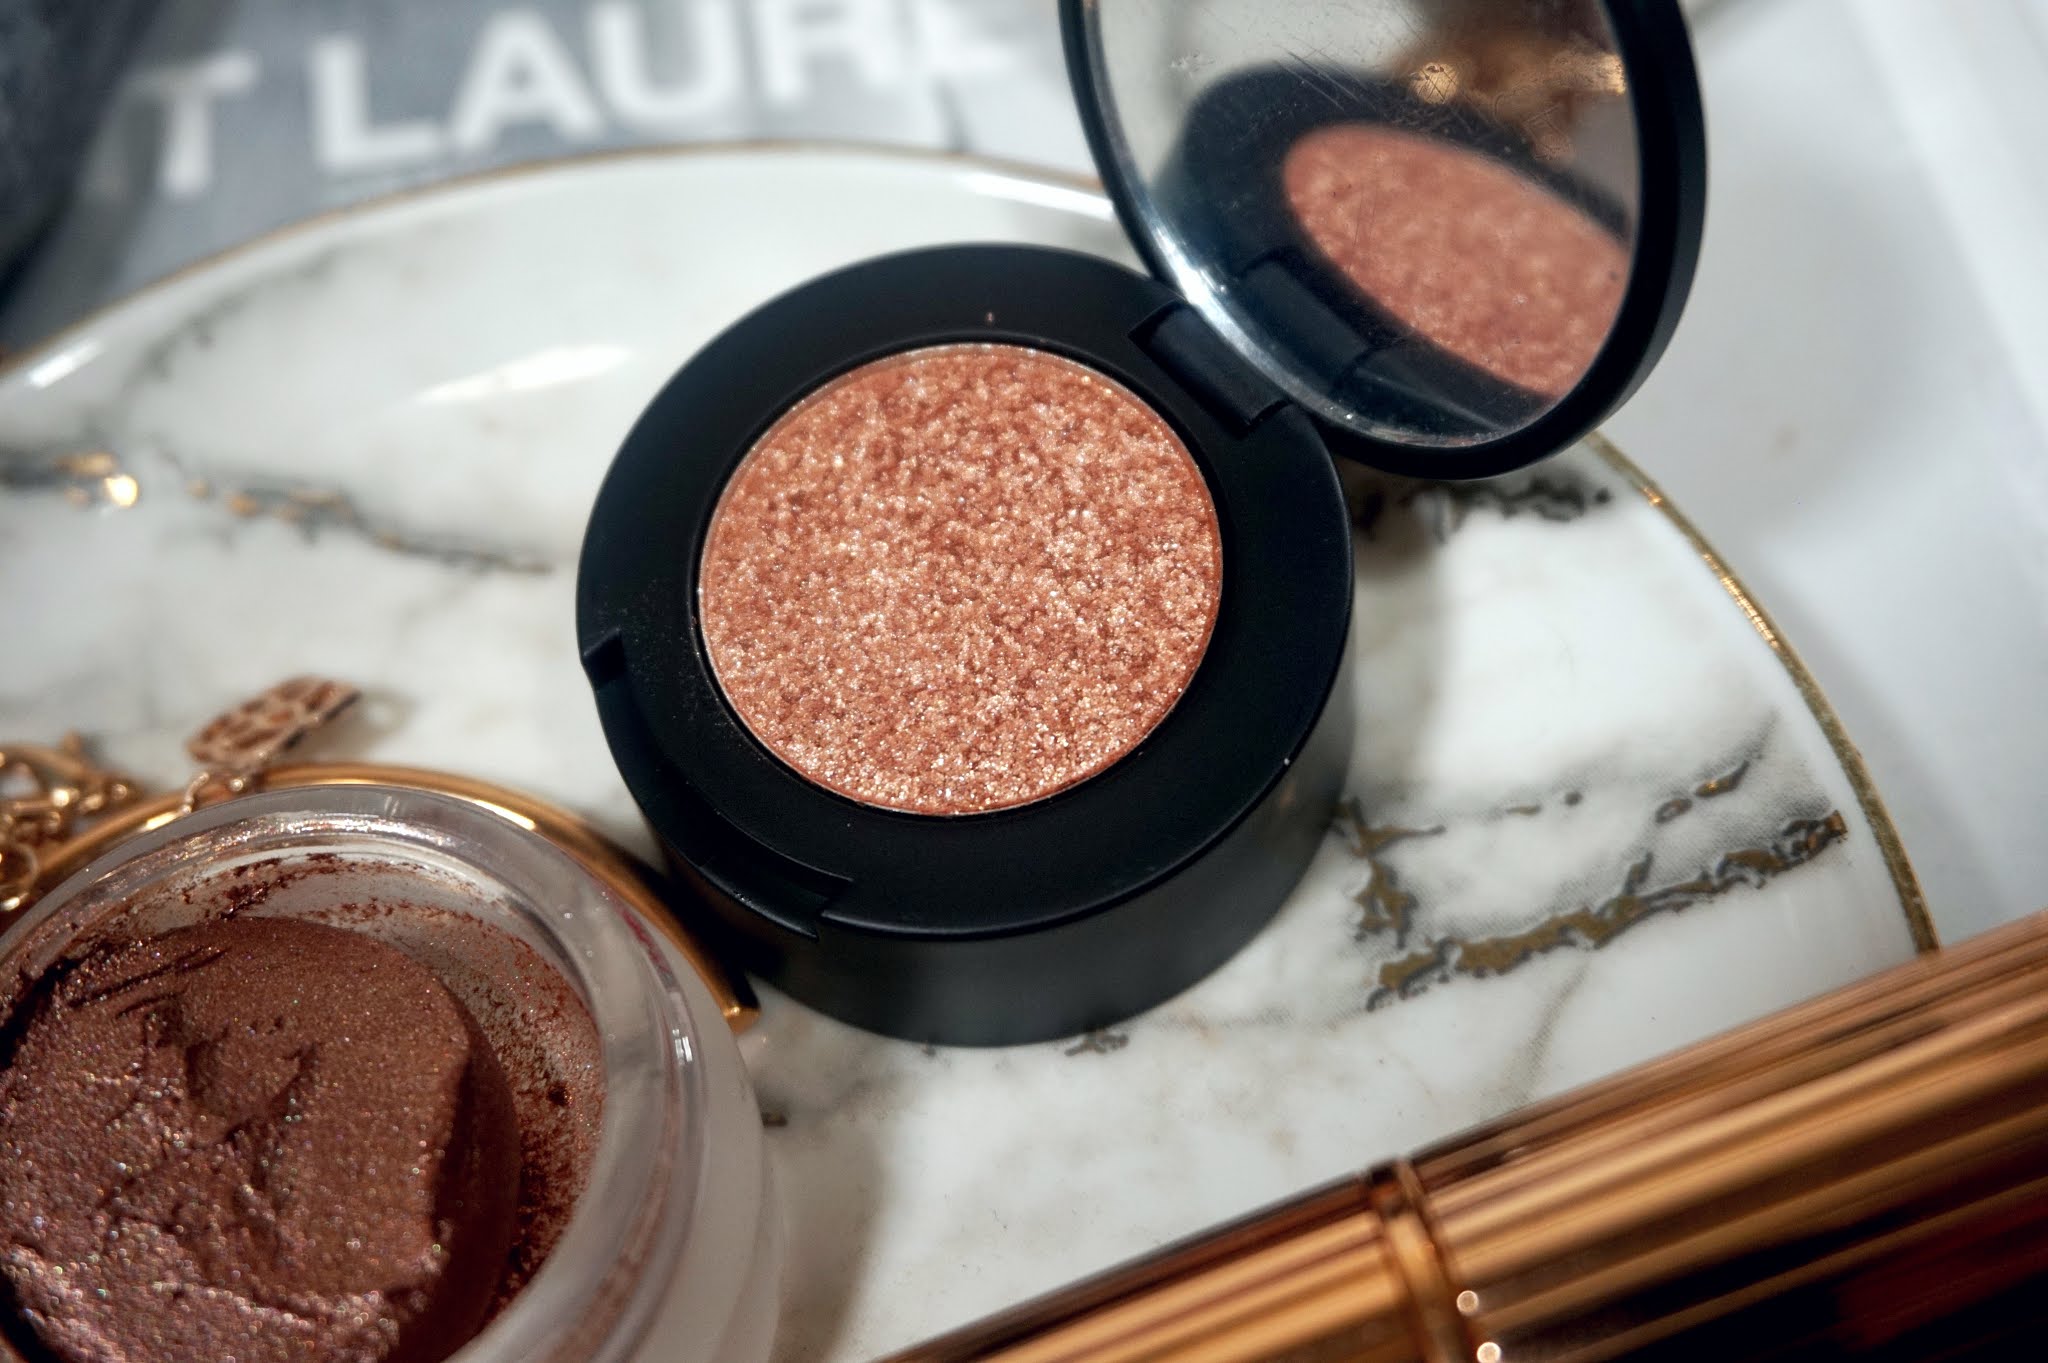 AURIC Cosmetics Smoke Reflect Cream + Powder Eye Shadow Duo Review and Swatches